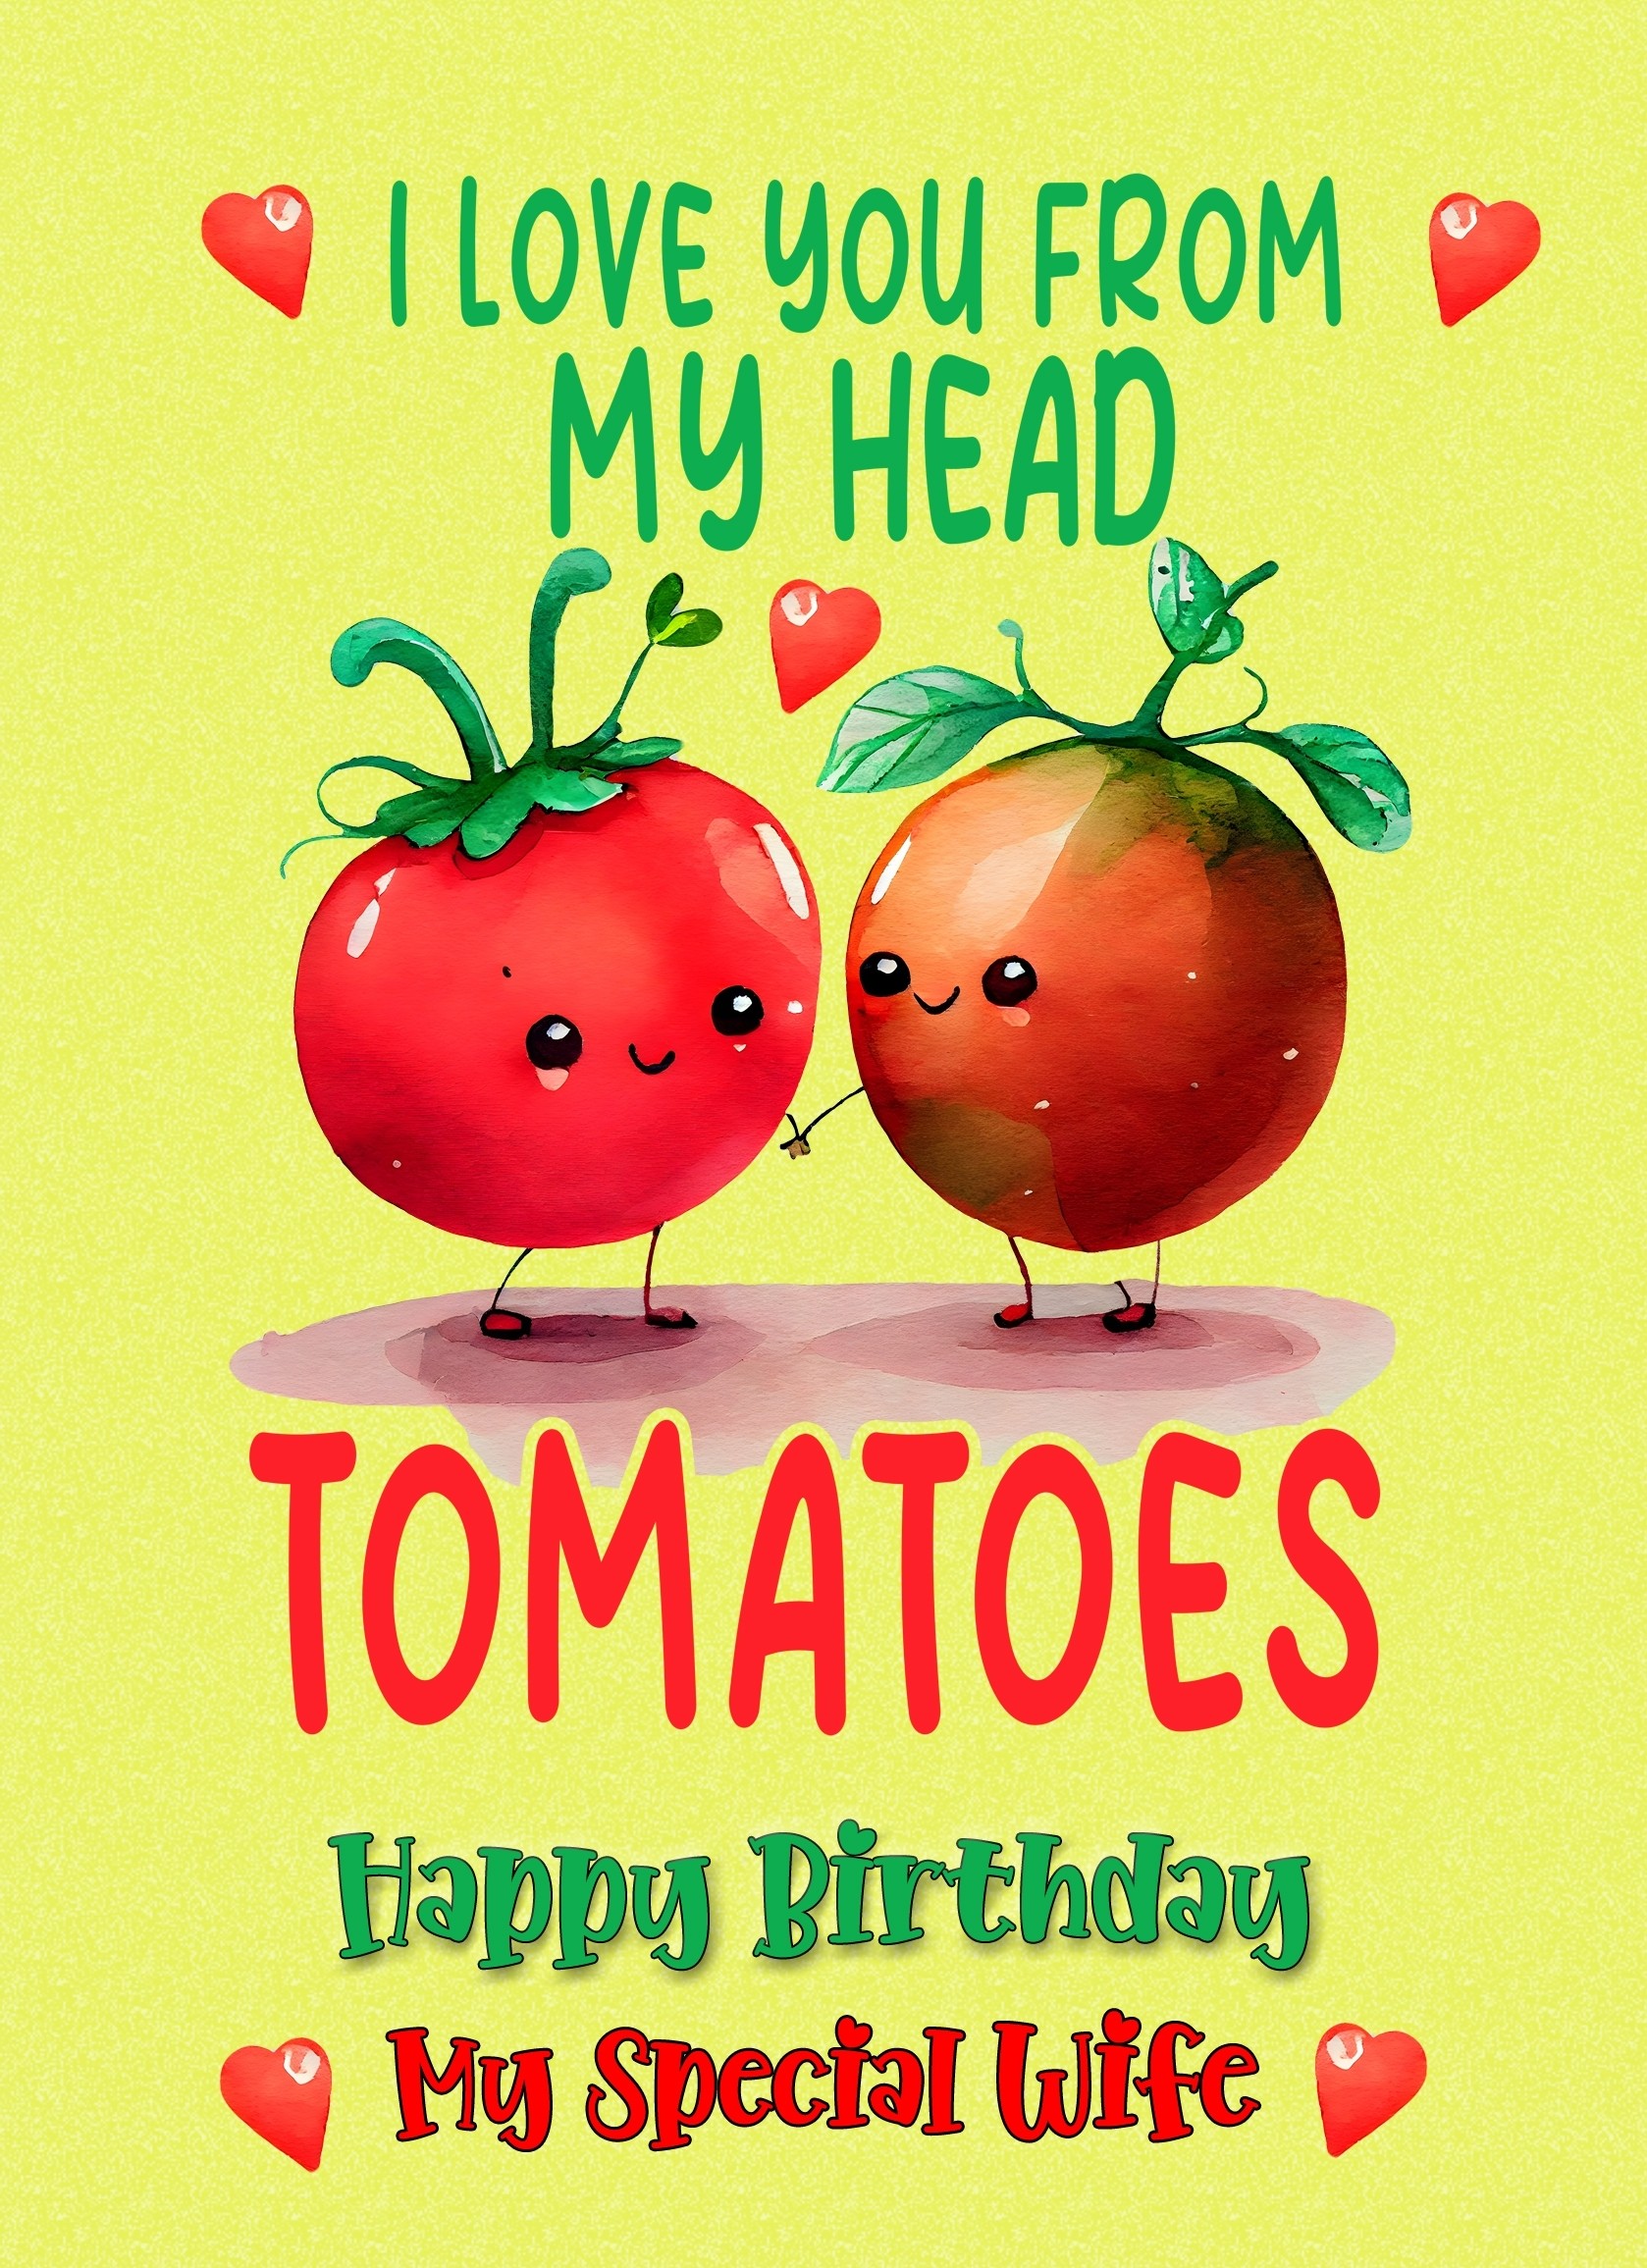 Funny Pun Romantic Birthday Card for Wife (Tomatoes)